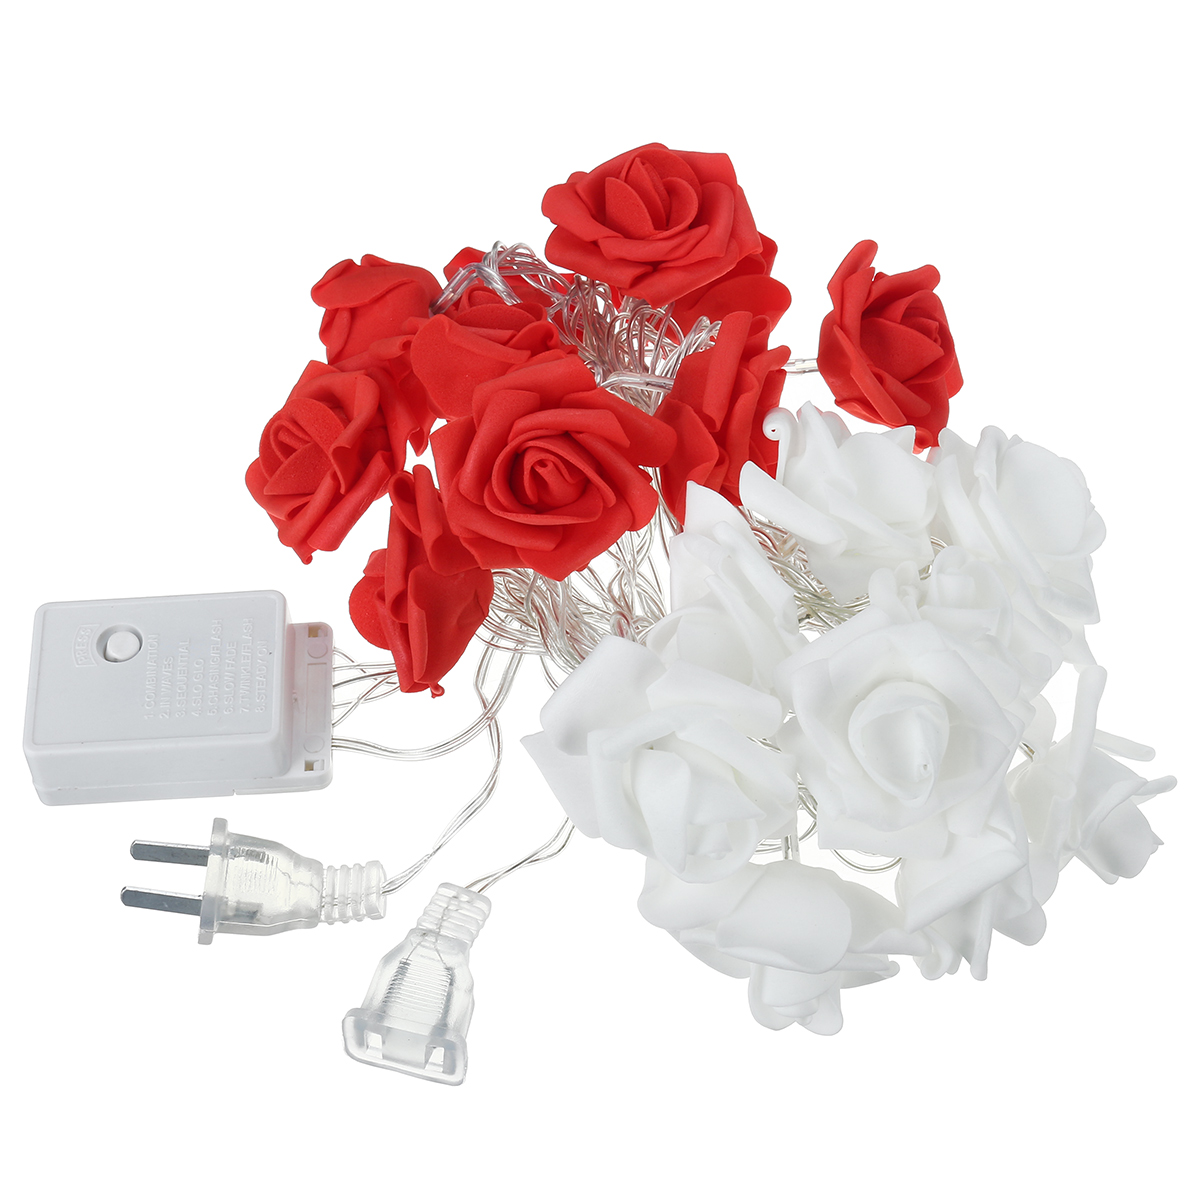 3M-6M-LED-Artificia-Rose-Flower-Fairy-String-Light-Home-Party-Wedding-Holiday-Christmas-Decor-Lamp-A-1715953-7